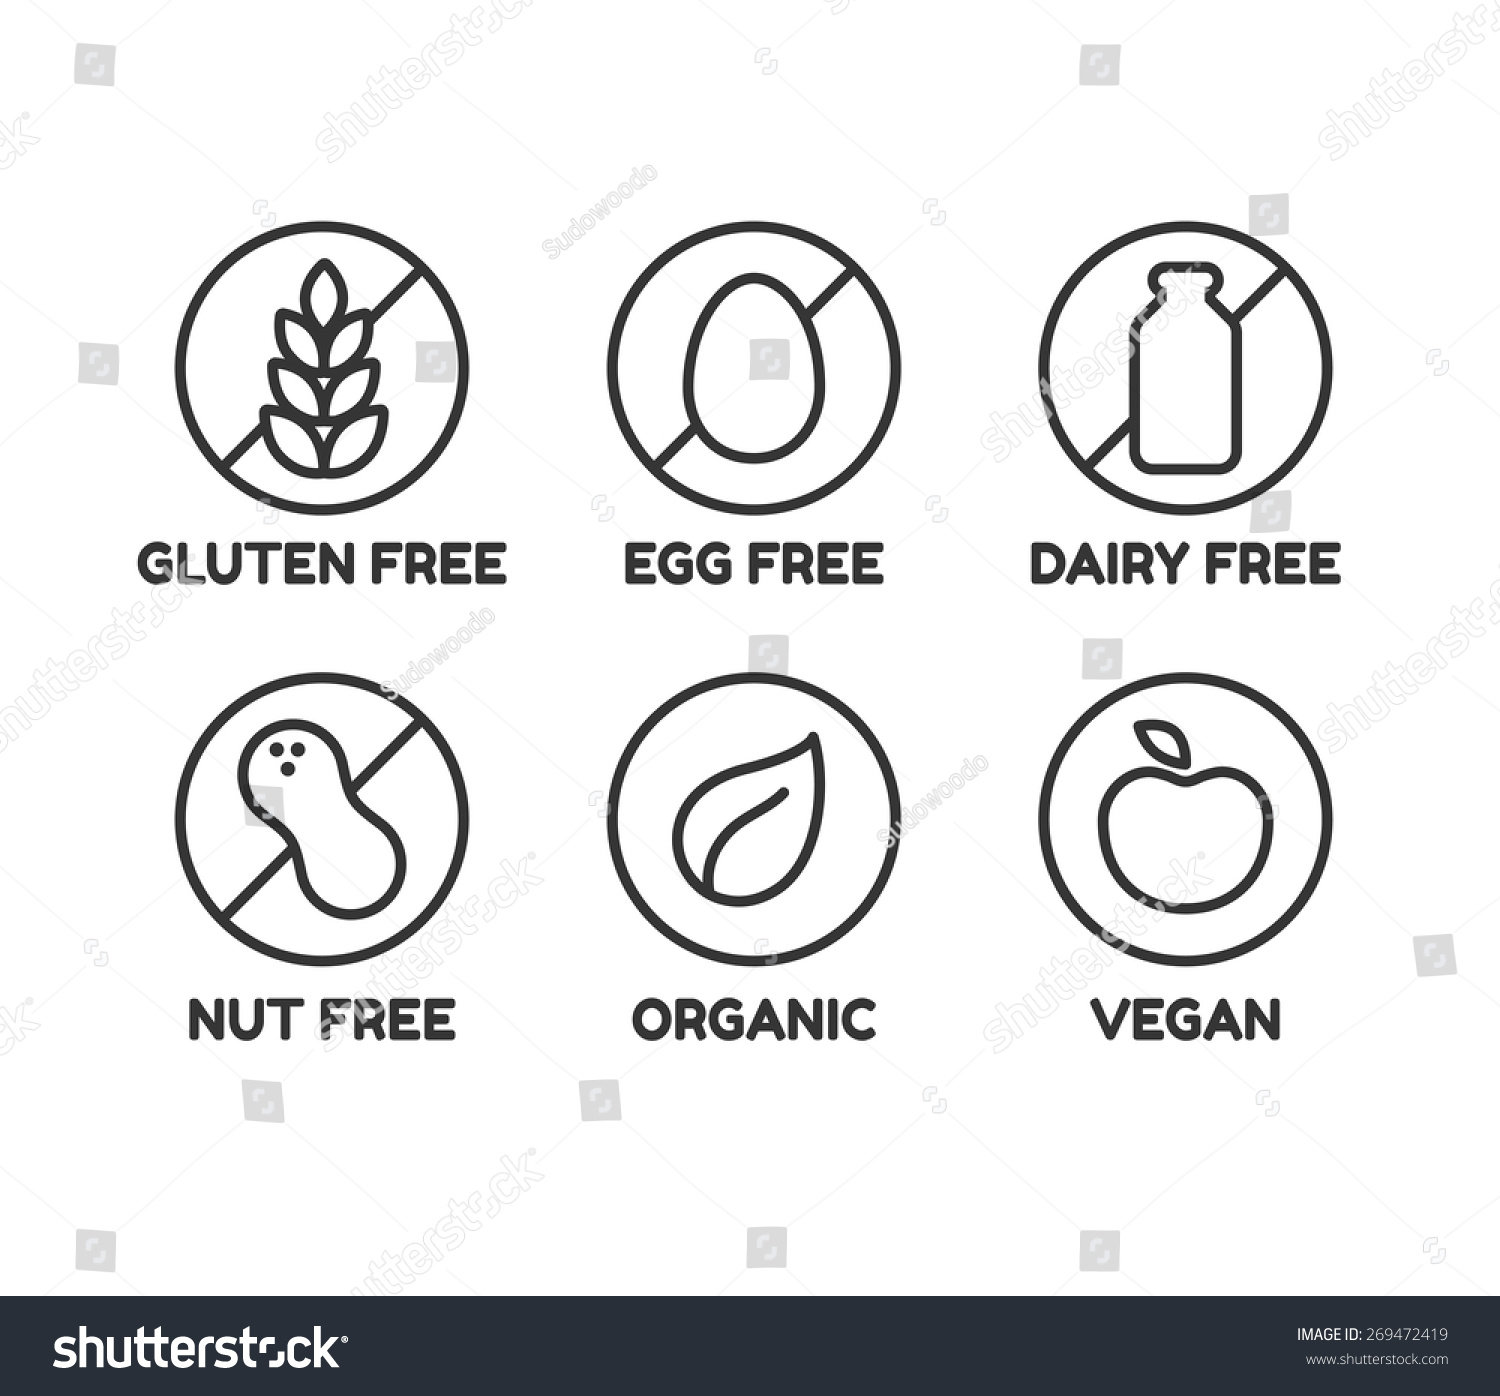 SVG of Set of icons illustrating absence of common food allergens (gluten, dairy, egg, nuts) plus vegan and organic signs. svg